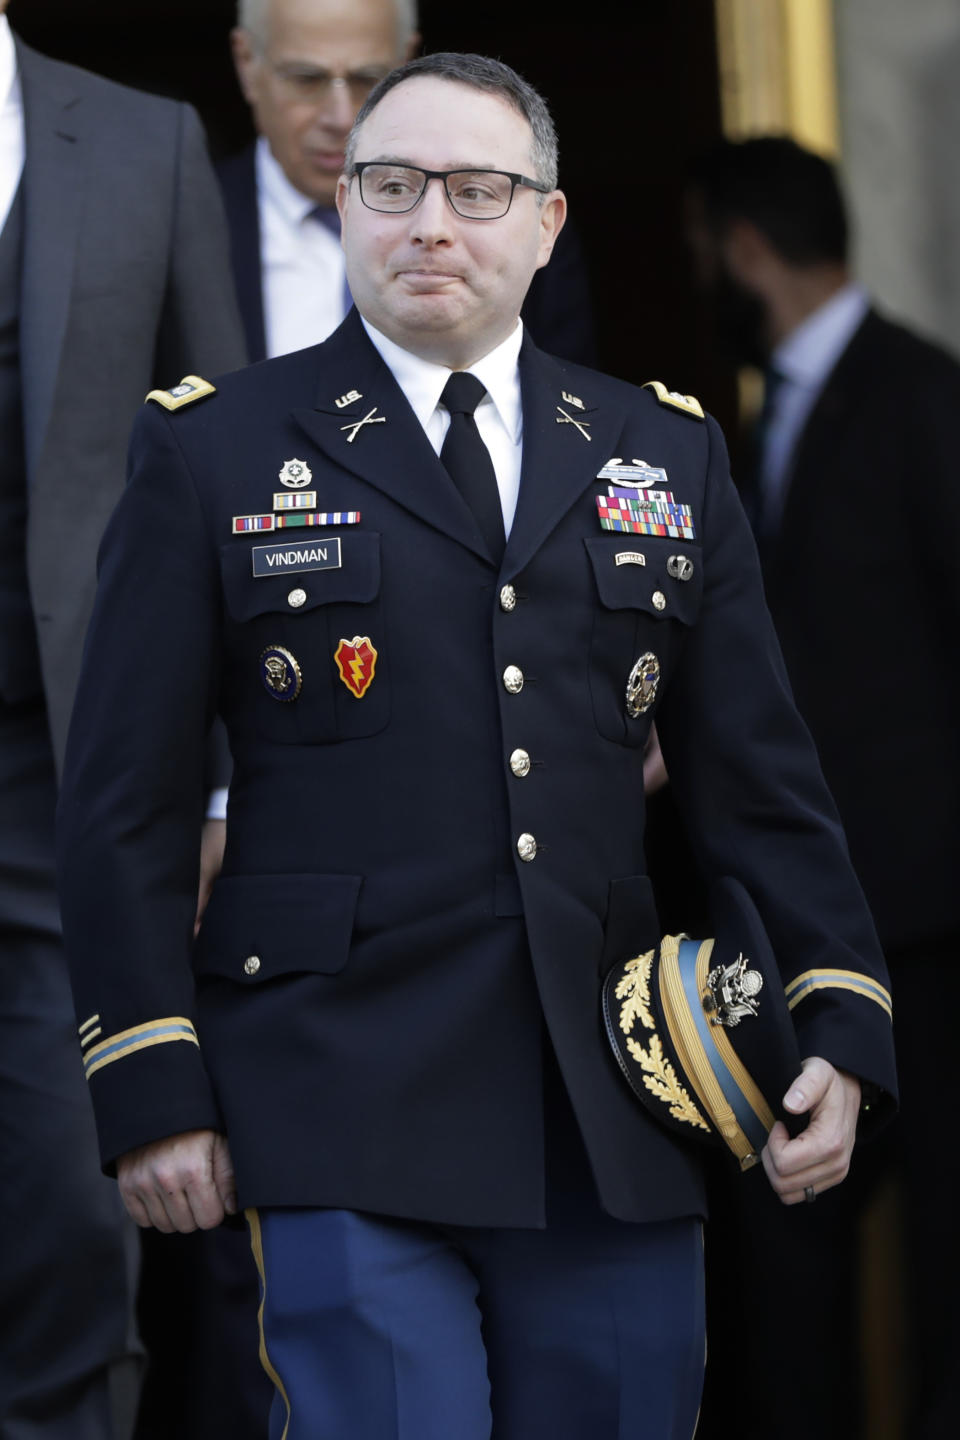 National Security Council aide Lt. Col. Alexander Vindman, leaves after testifying before the House Intelligence Committee on Capitol Hill in Washington, Tuesday, Nov. 19, 2019, during a public impeachment hearing of President Donald Trump's efforts to tie U.S. aid for Ukraine to investigations of his political opponents. (AP Photo/Julio Cortez)